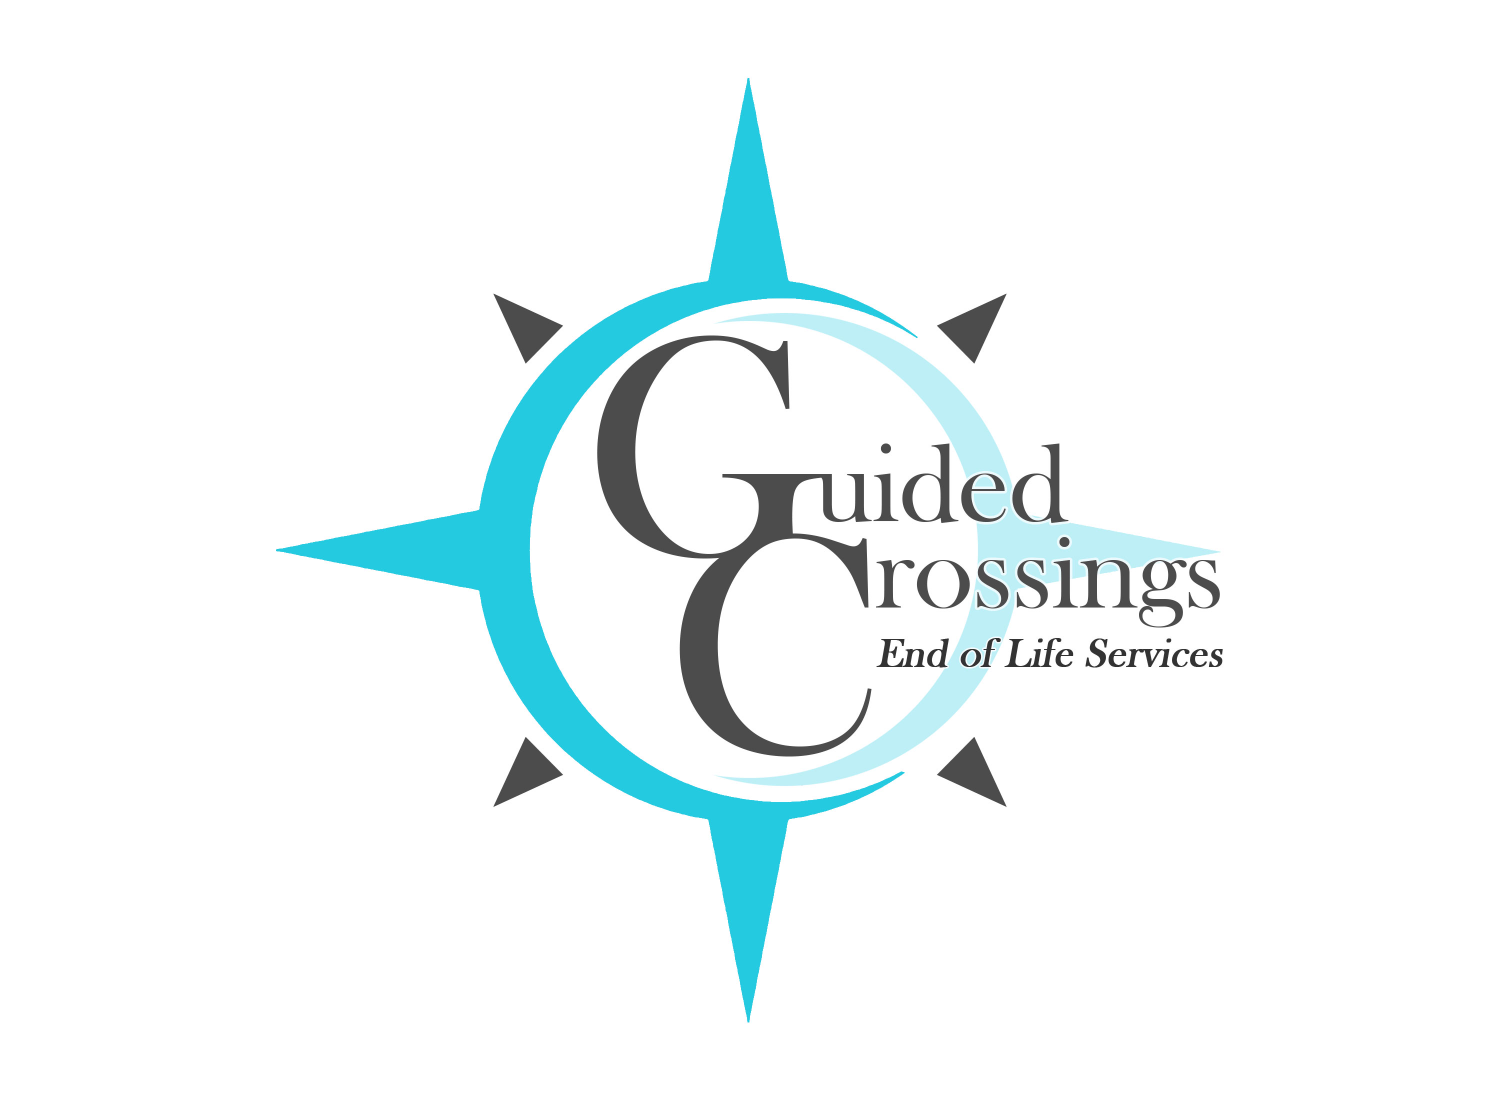 Guided Crossings: End of Life Services